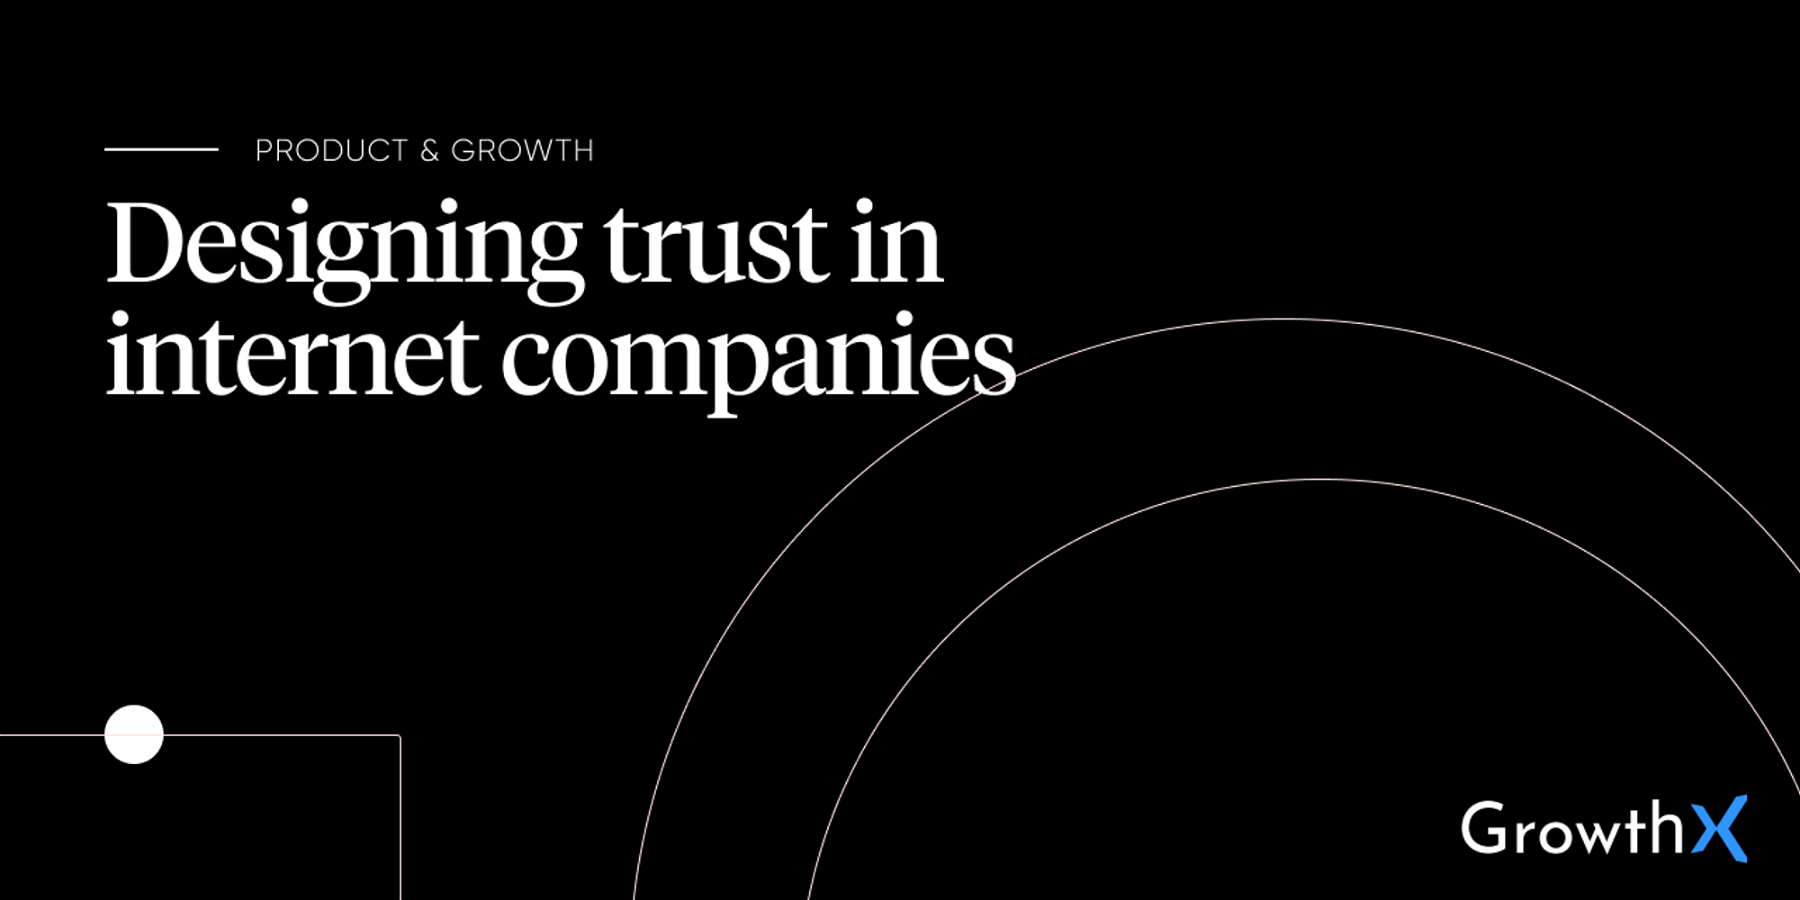 How to design for trust in internet companies?